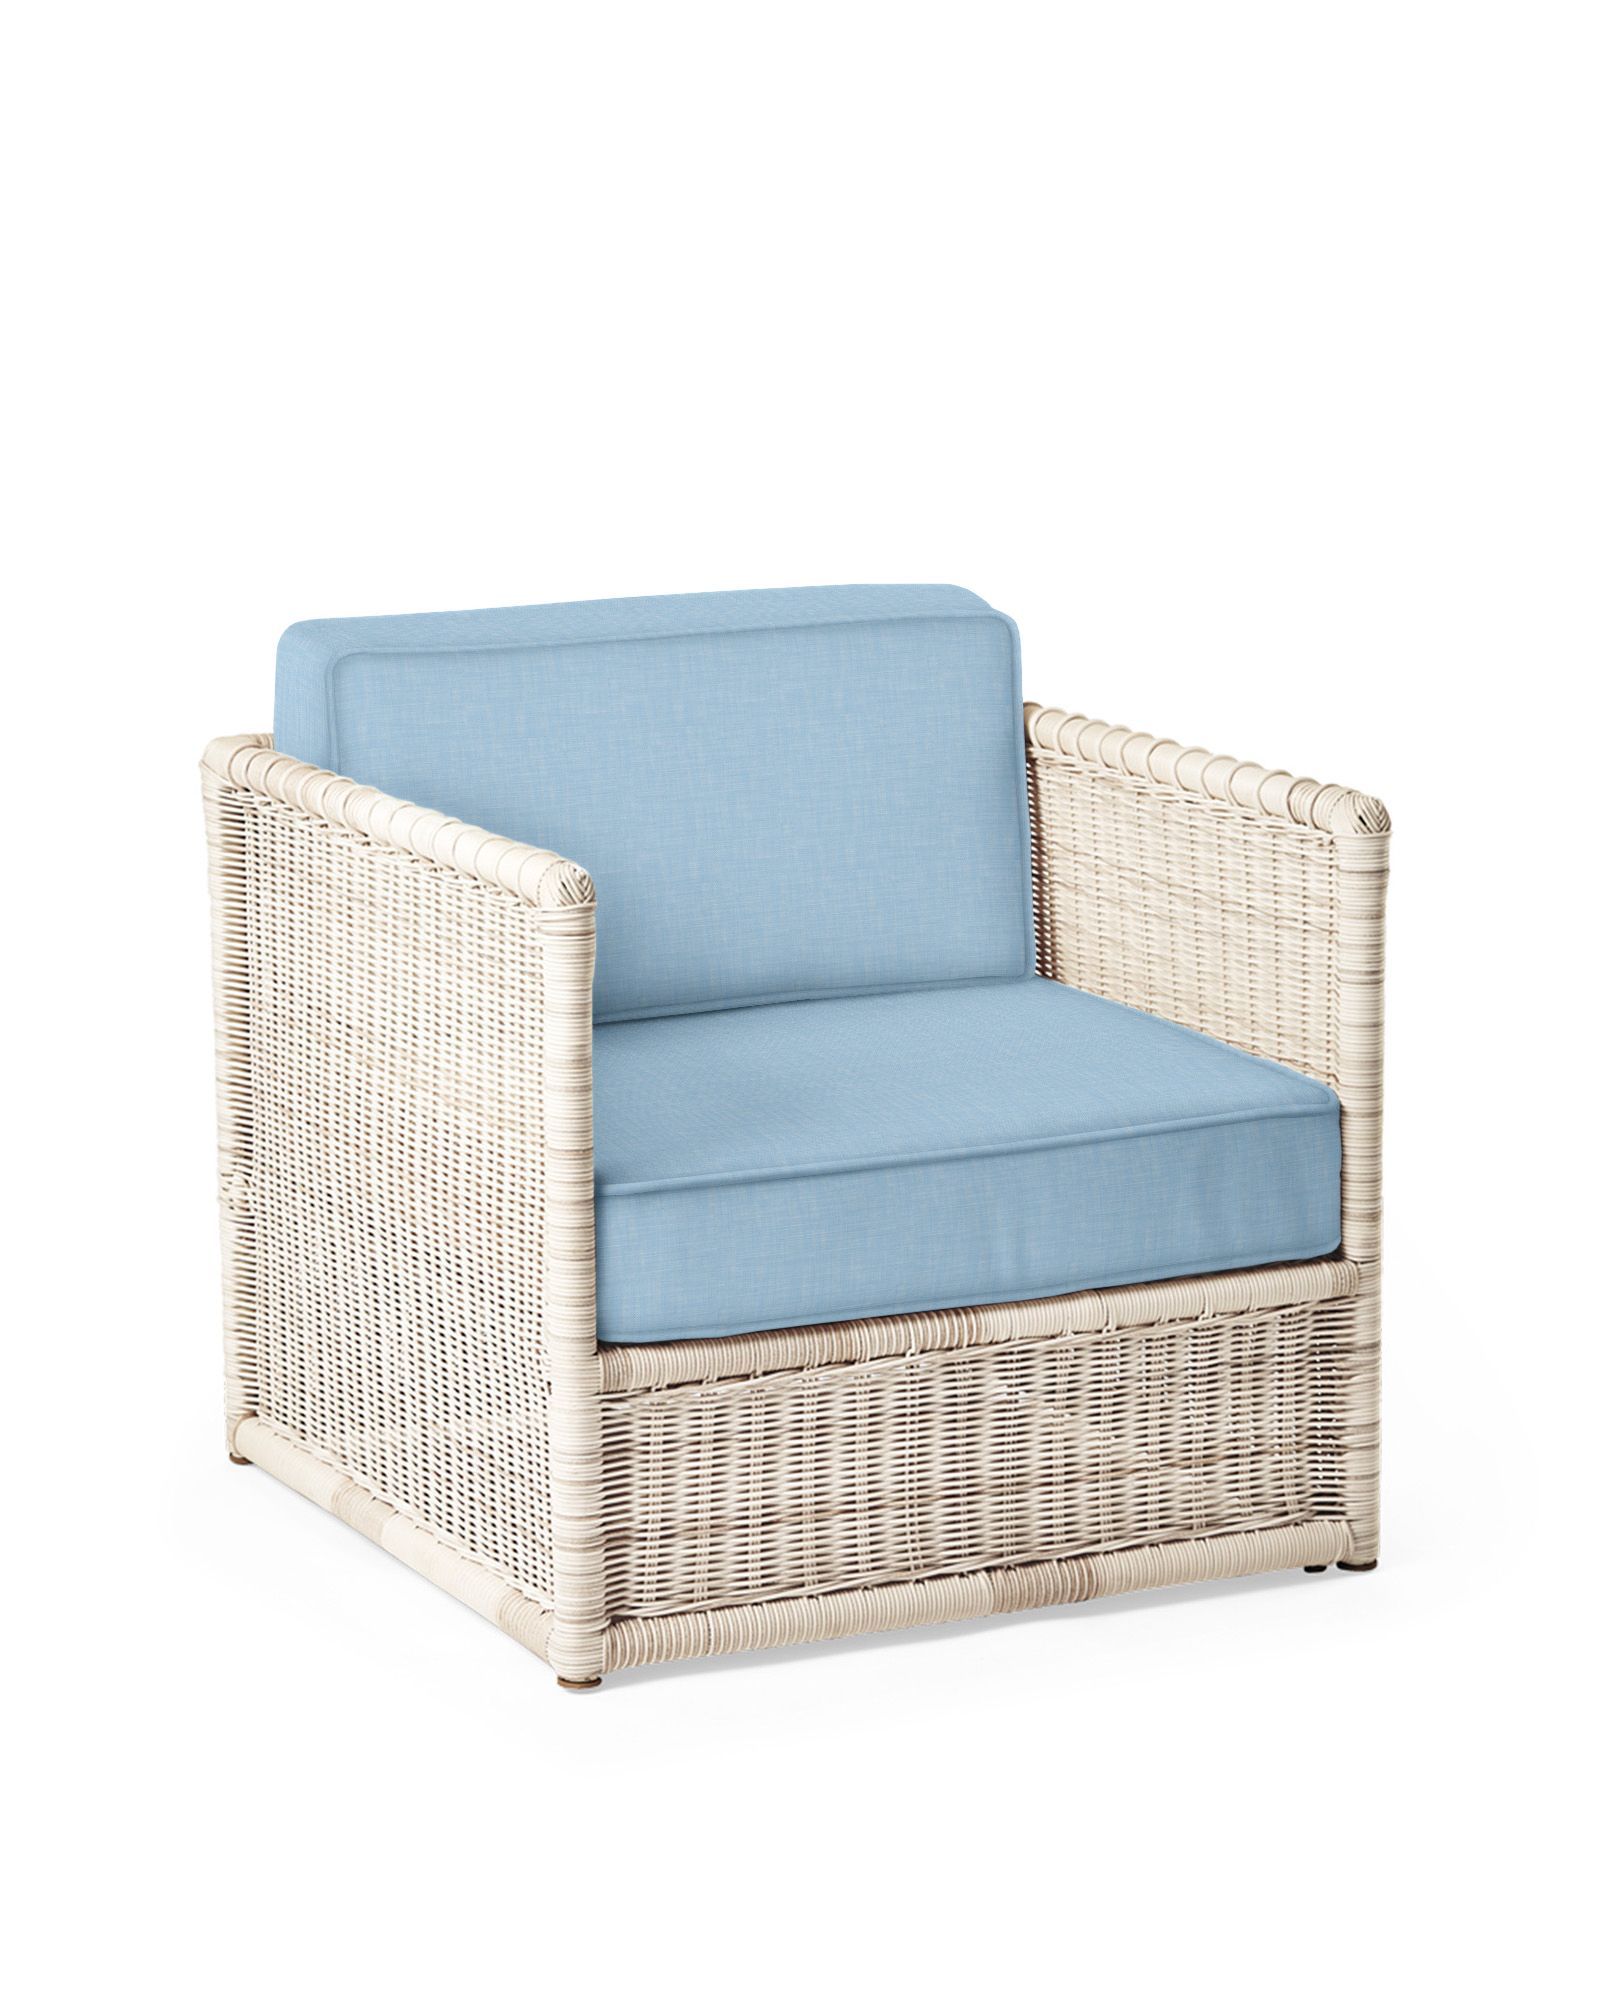 Pacifica Lounge Chair - Driftwood | Serena and Lily